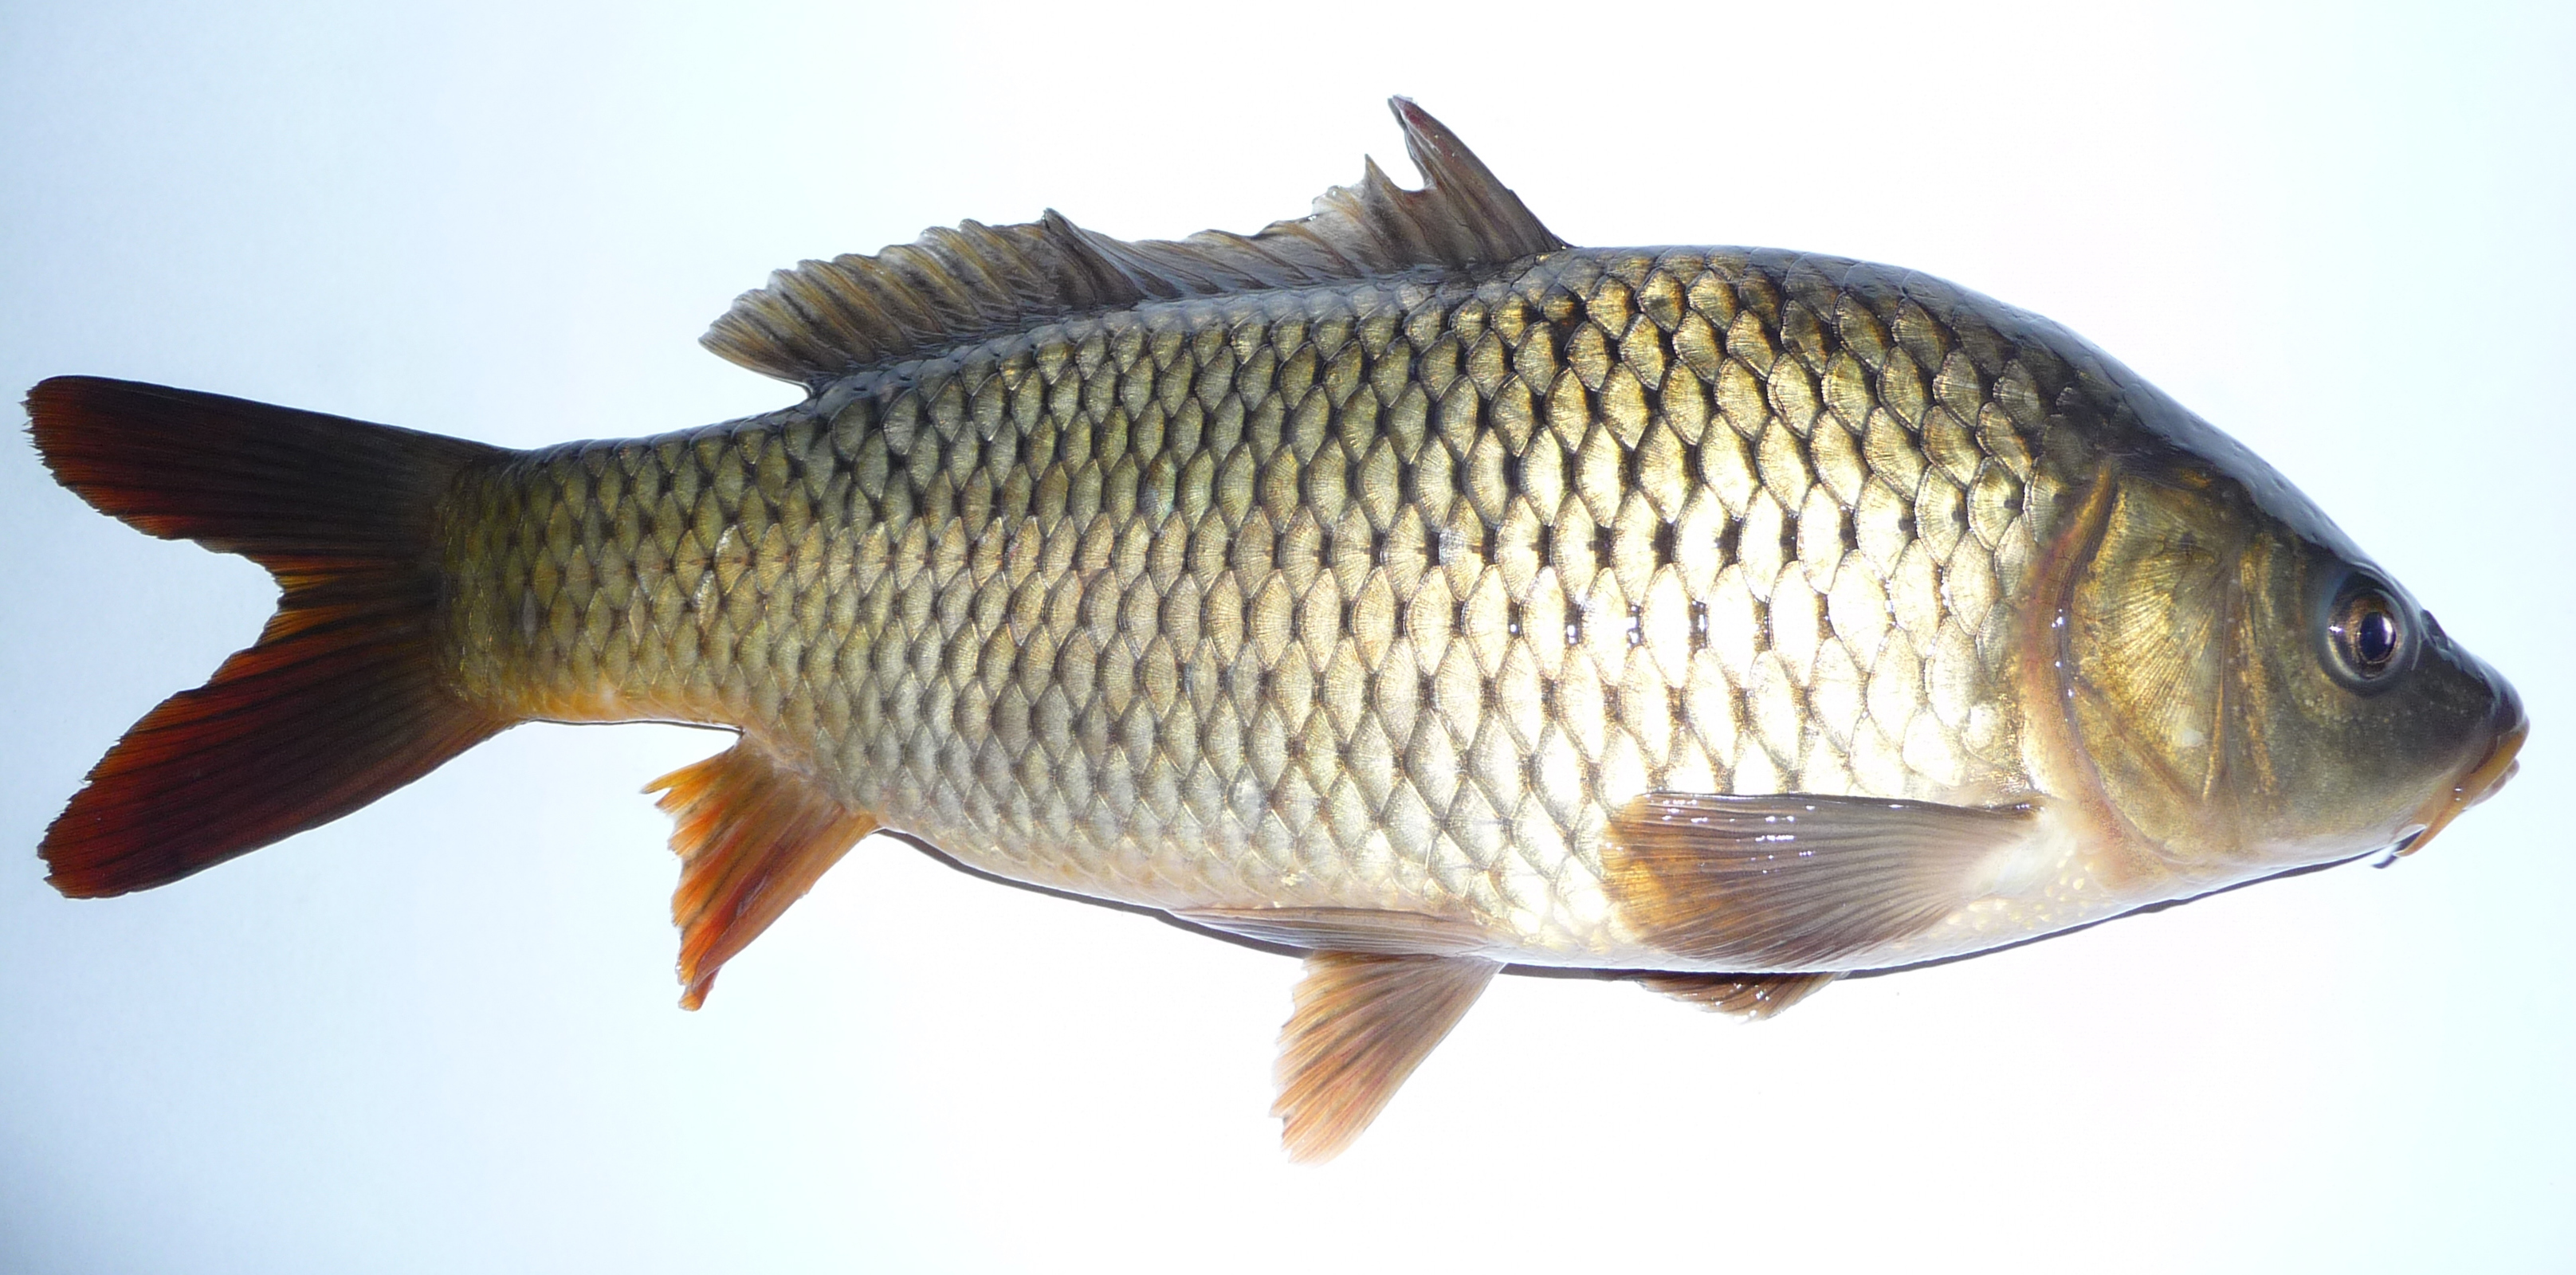 CARP FISHING FOR BEGINNERS: Guide On How To Carp Fish, Common Carp Species,  Tips For Fishing Carps